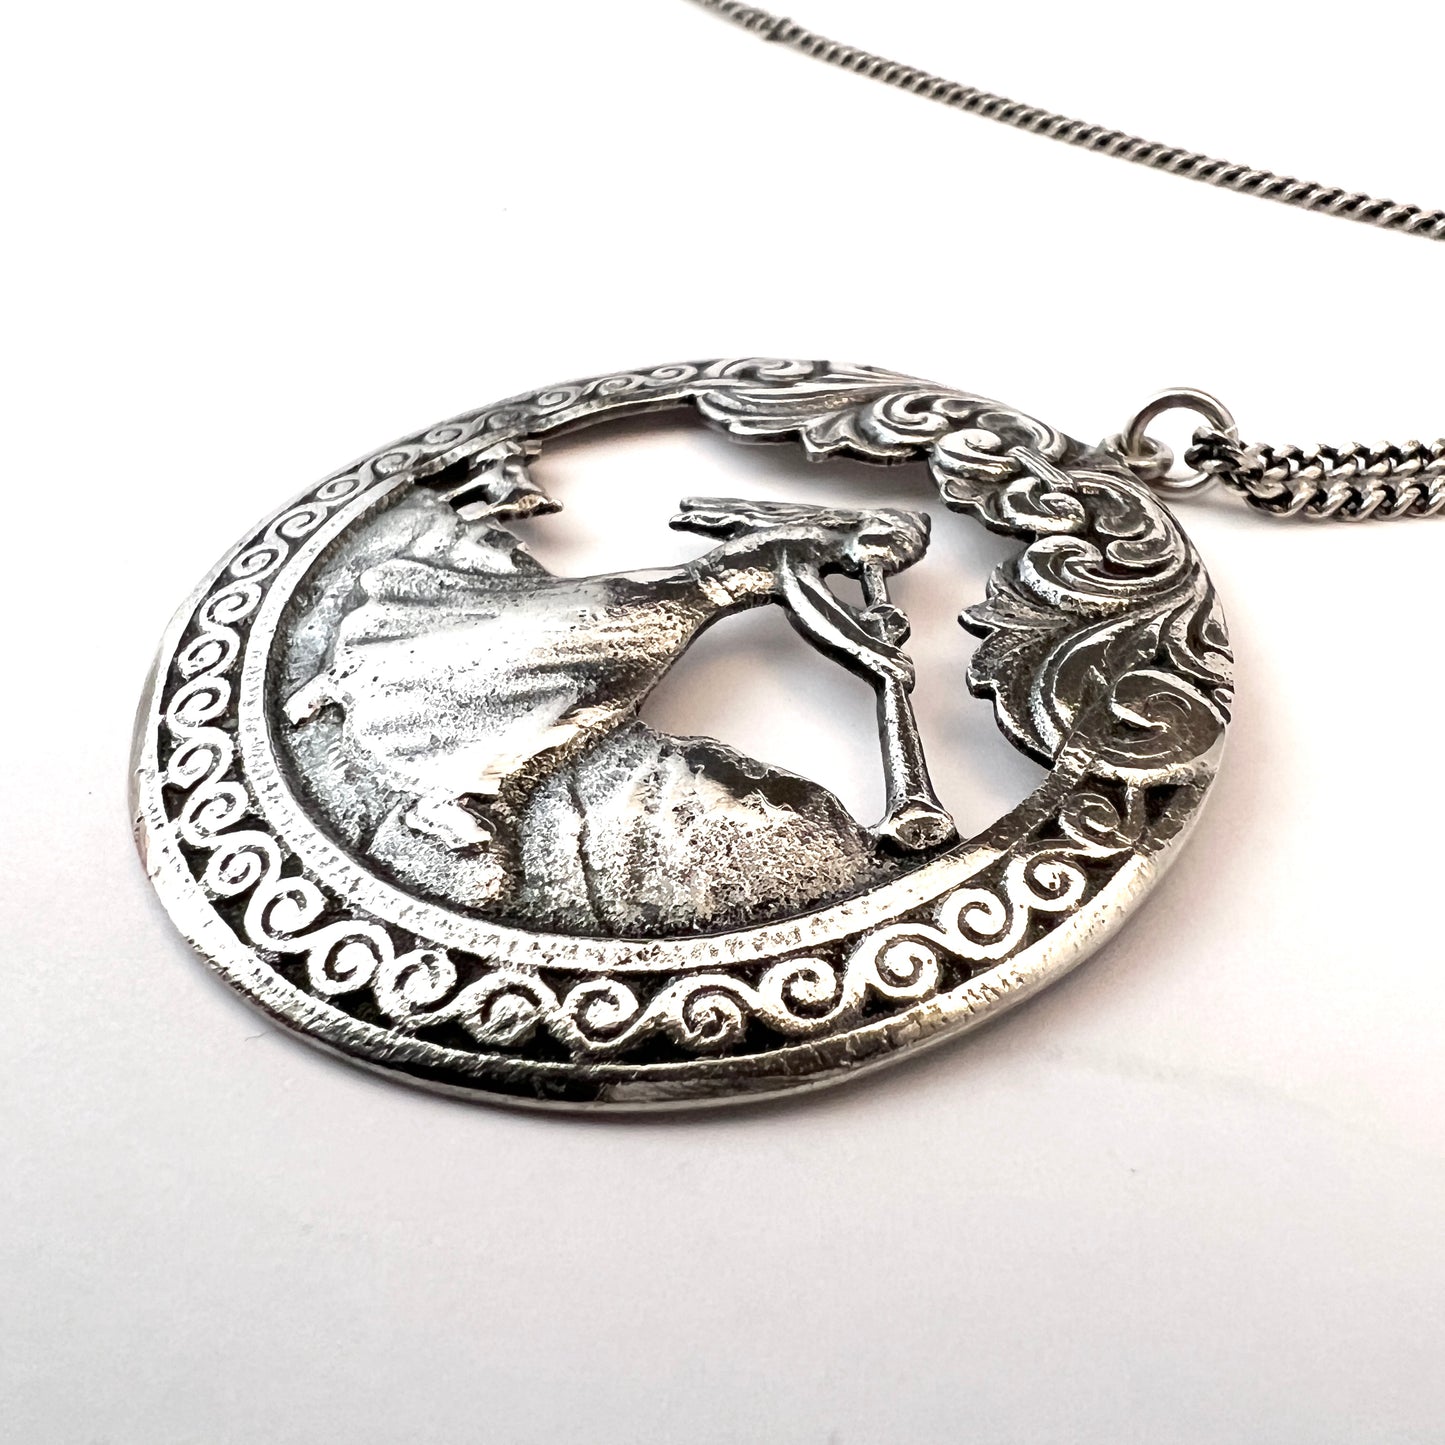 Norway Early 1900s Solid 830 Silver Pendant Necklace.